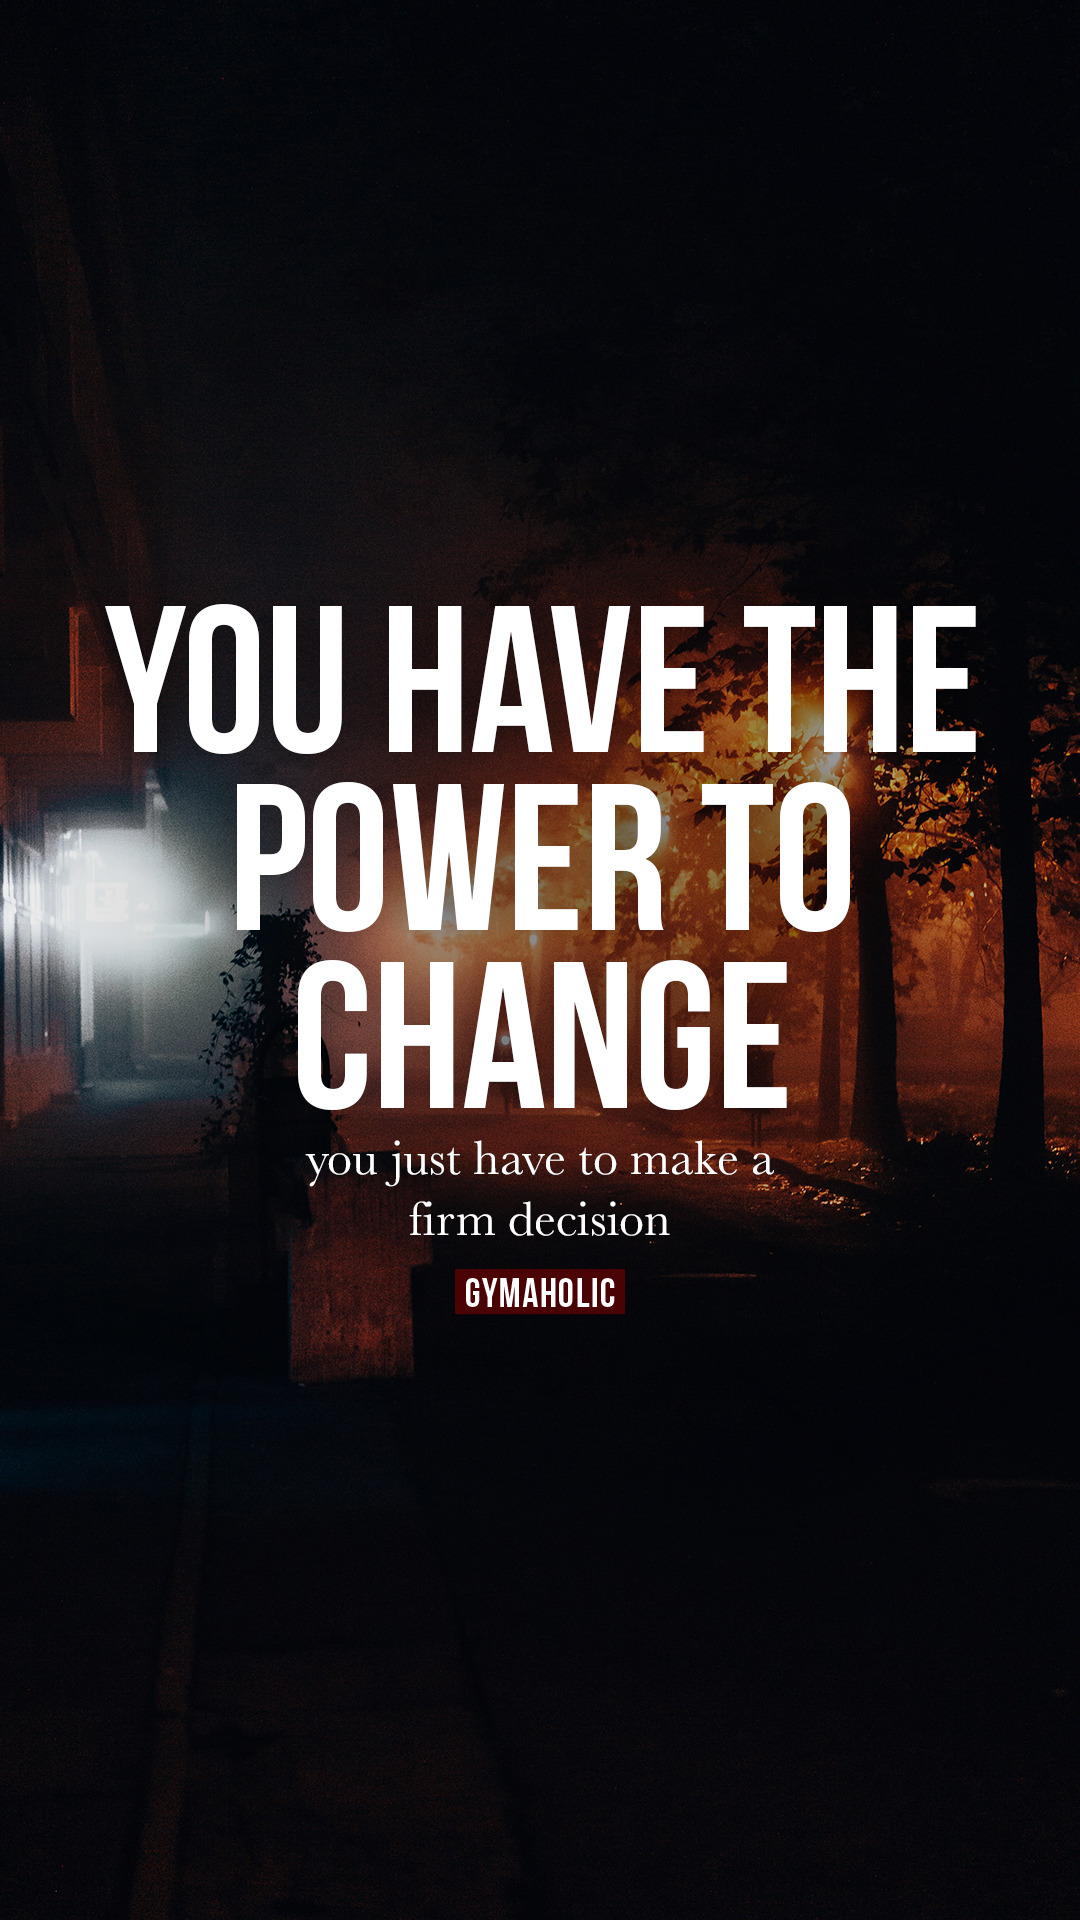 You have the power to change